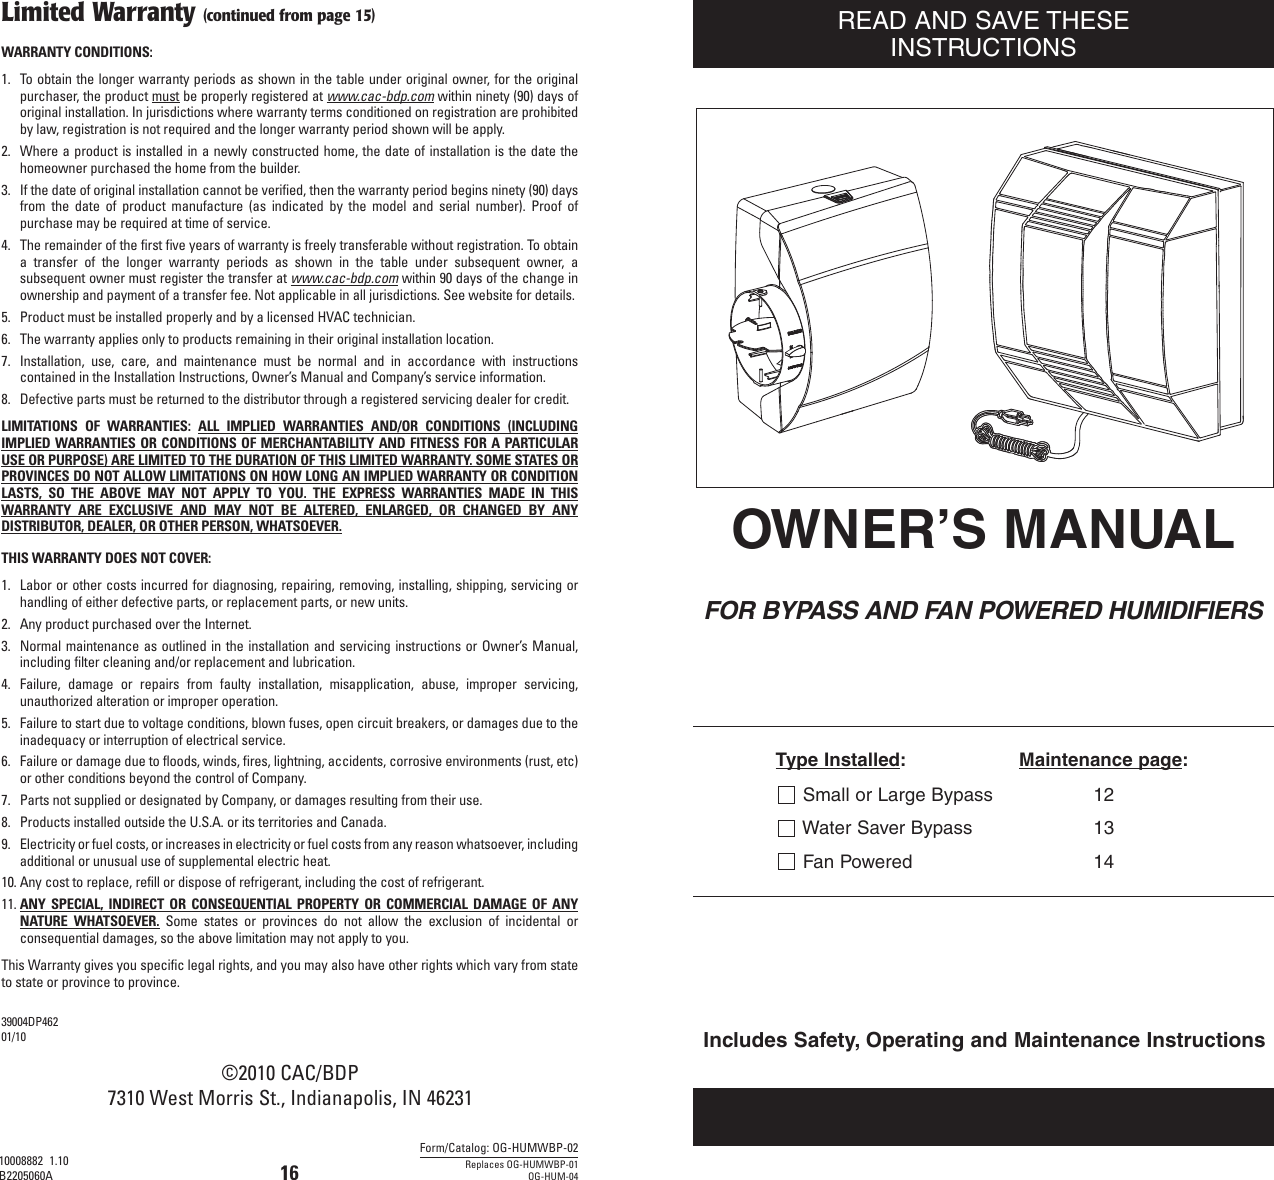 Page 1 of 8 - Carrier Carrier-Humcclbp-Owners-Manual- 10008101A Hum Owners  Carrier-humcclbp-owners-manual